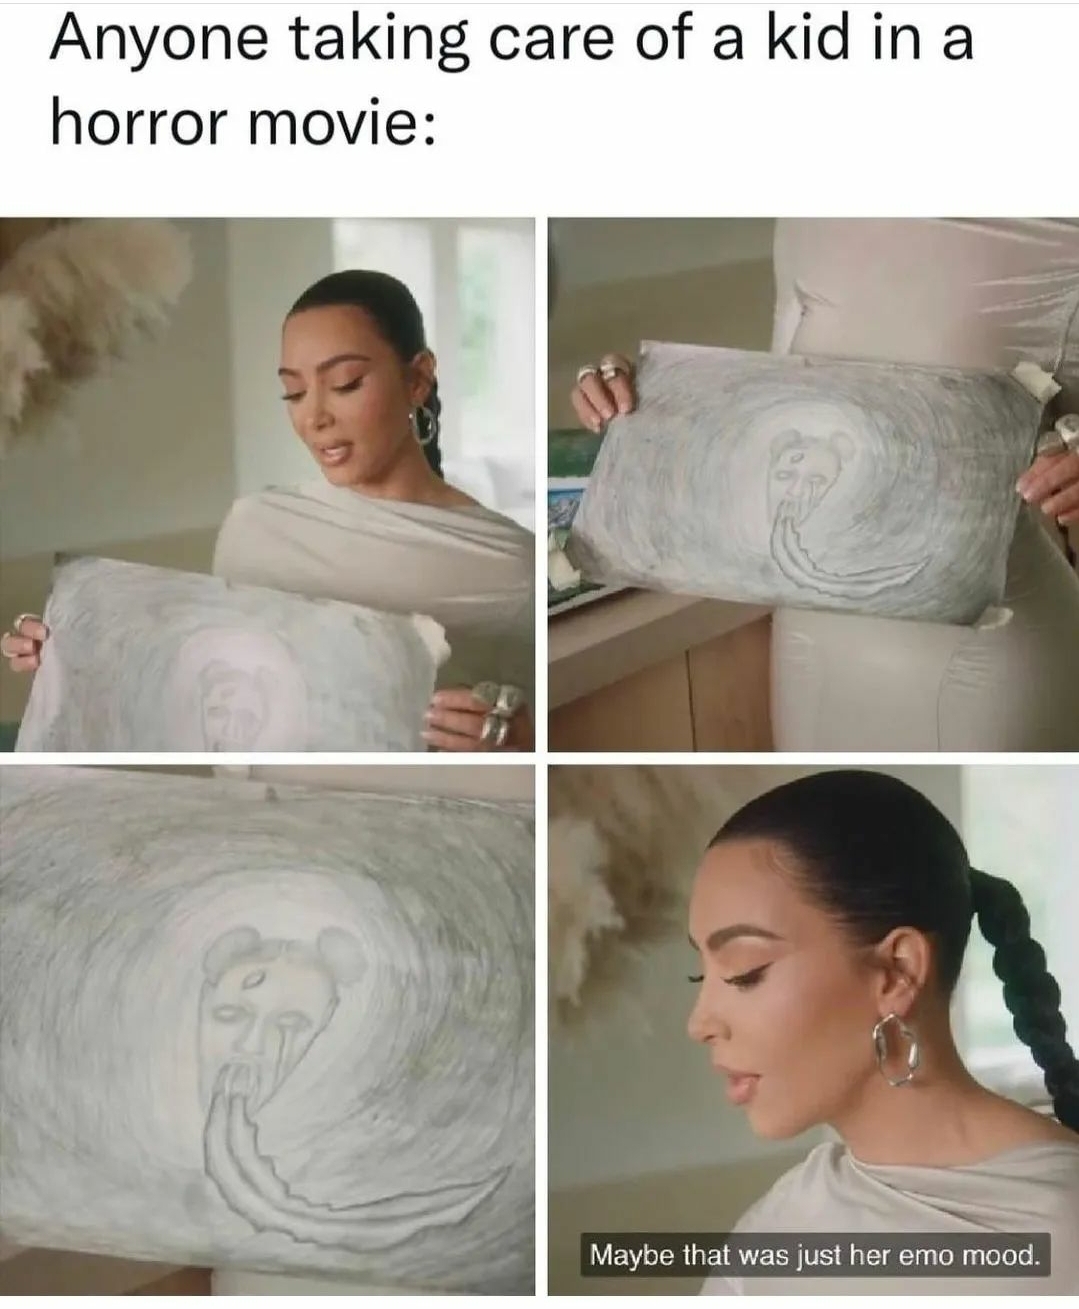 dank memes - shoulder - Anyone taking care of a kid in a horror movie Maybe that was just her emo mood.